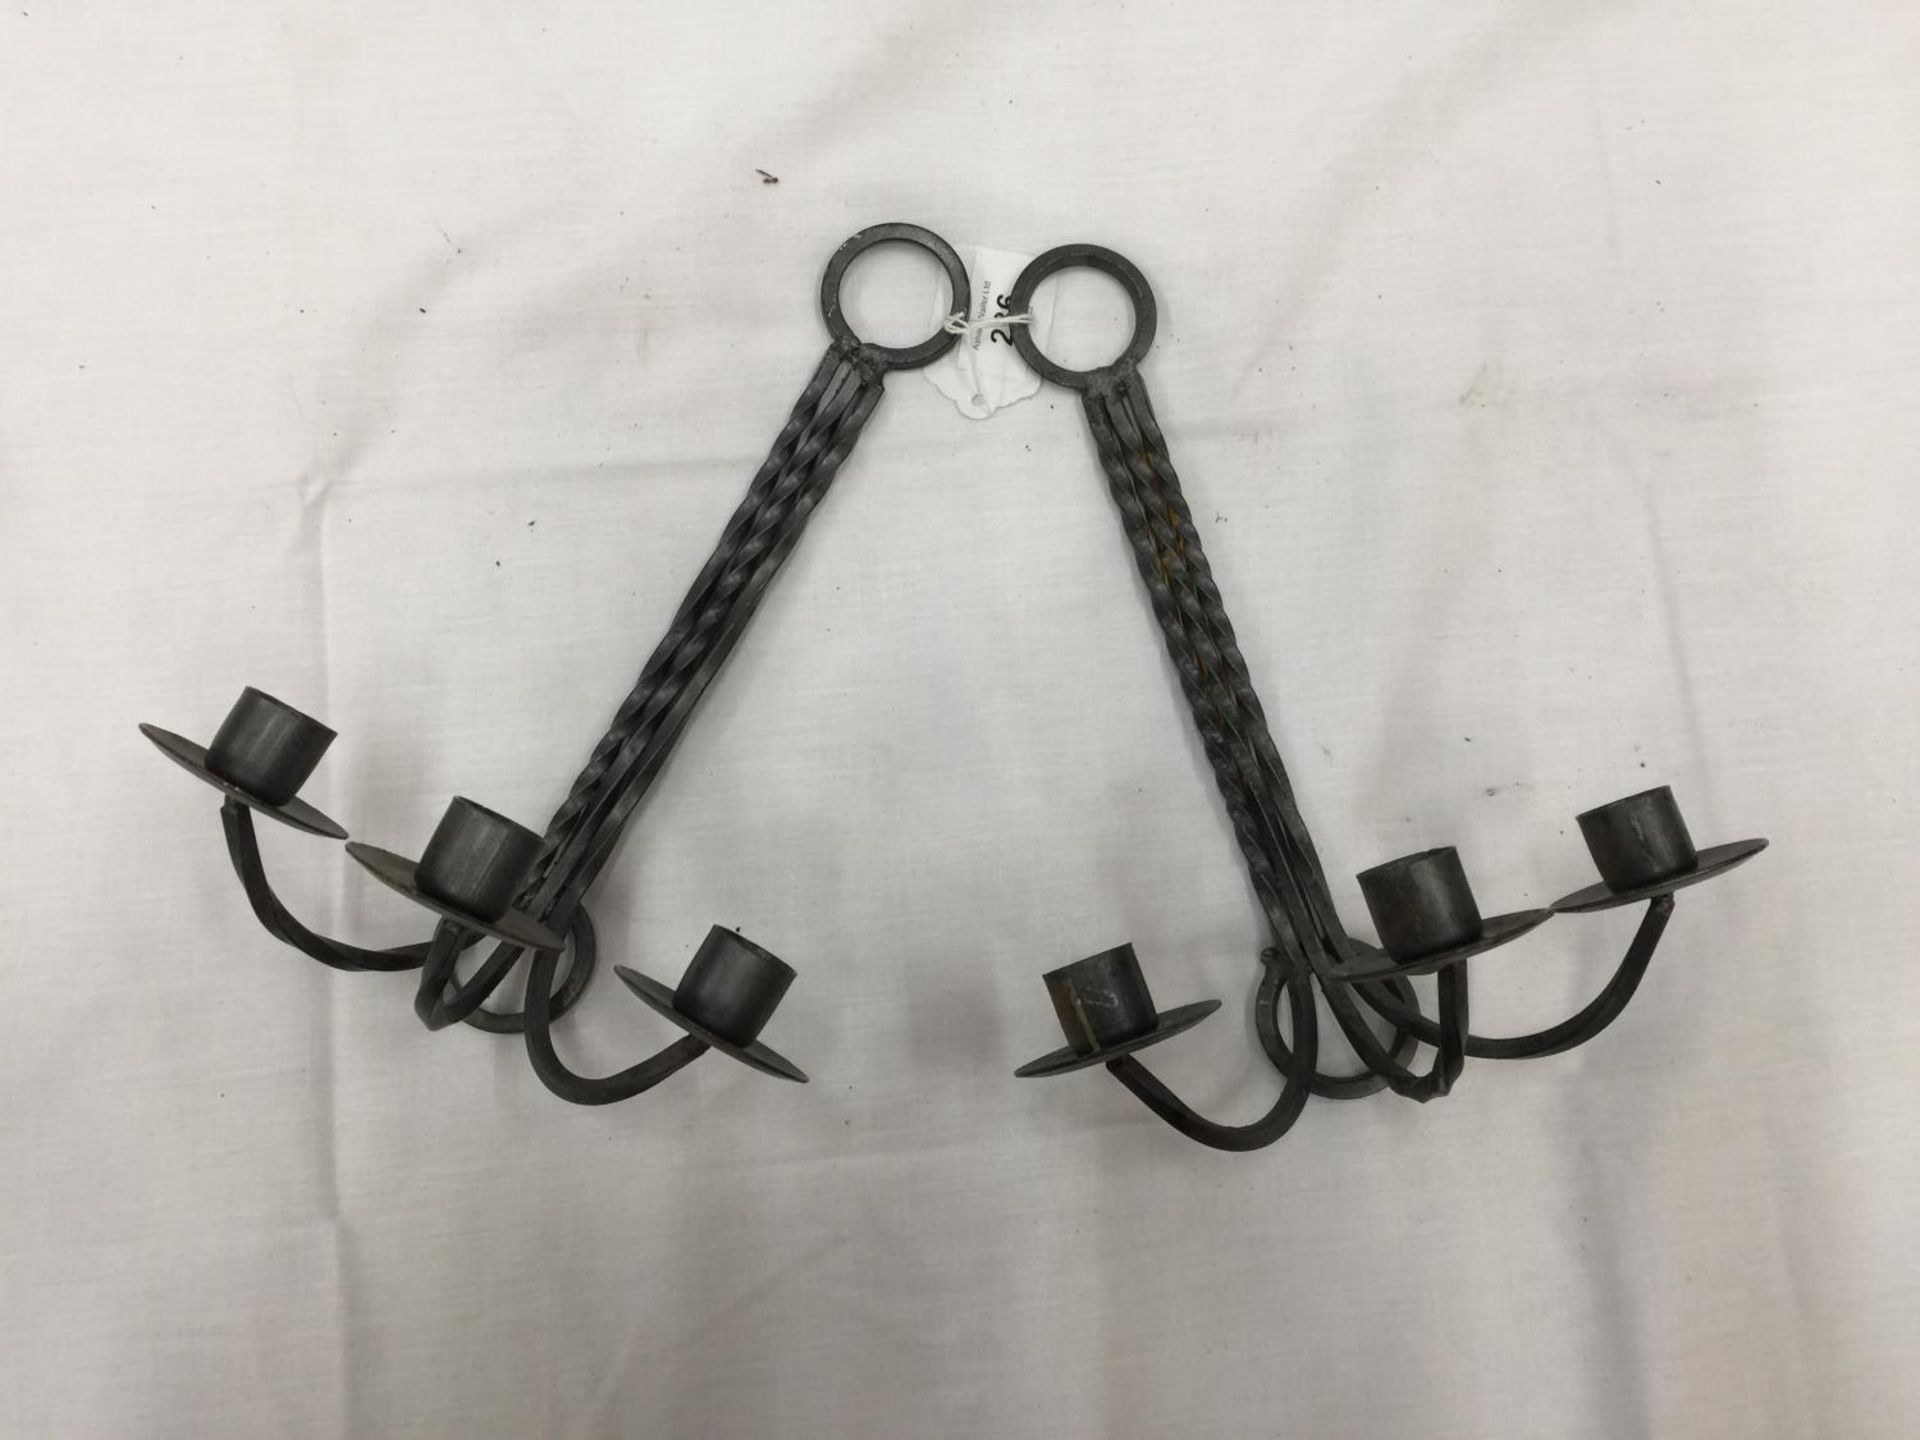 A PAIR OF WALL MOUNTED METAL CANDLESTICKS